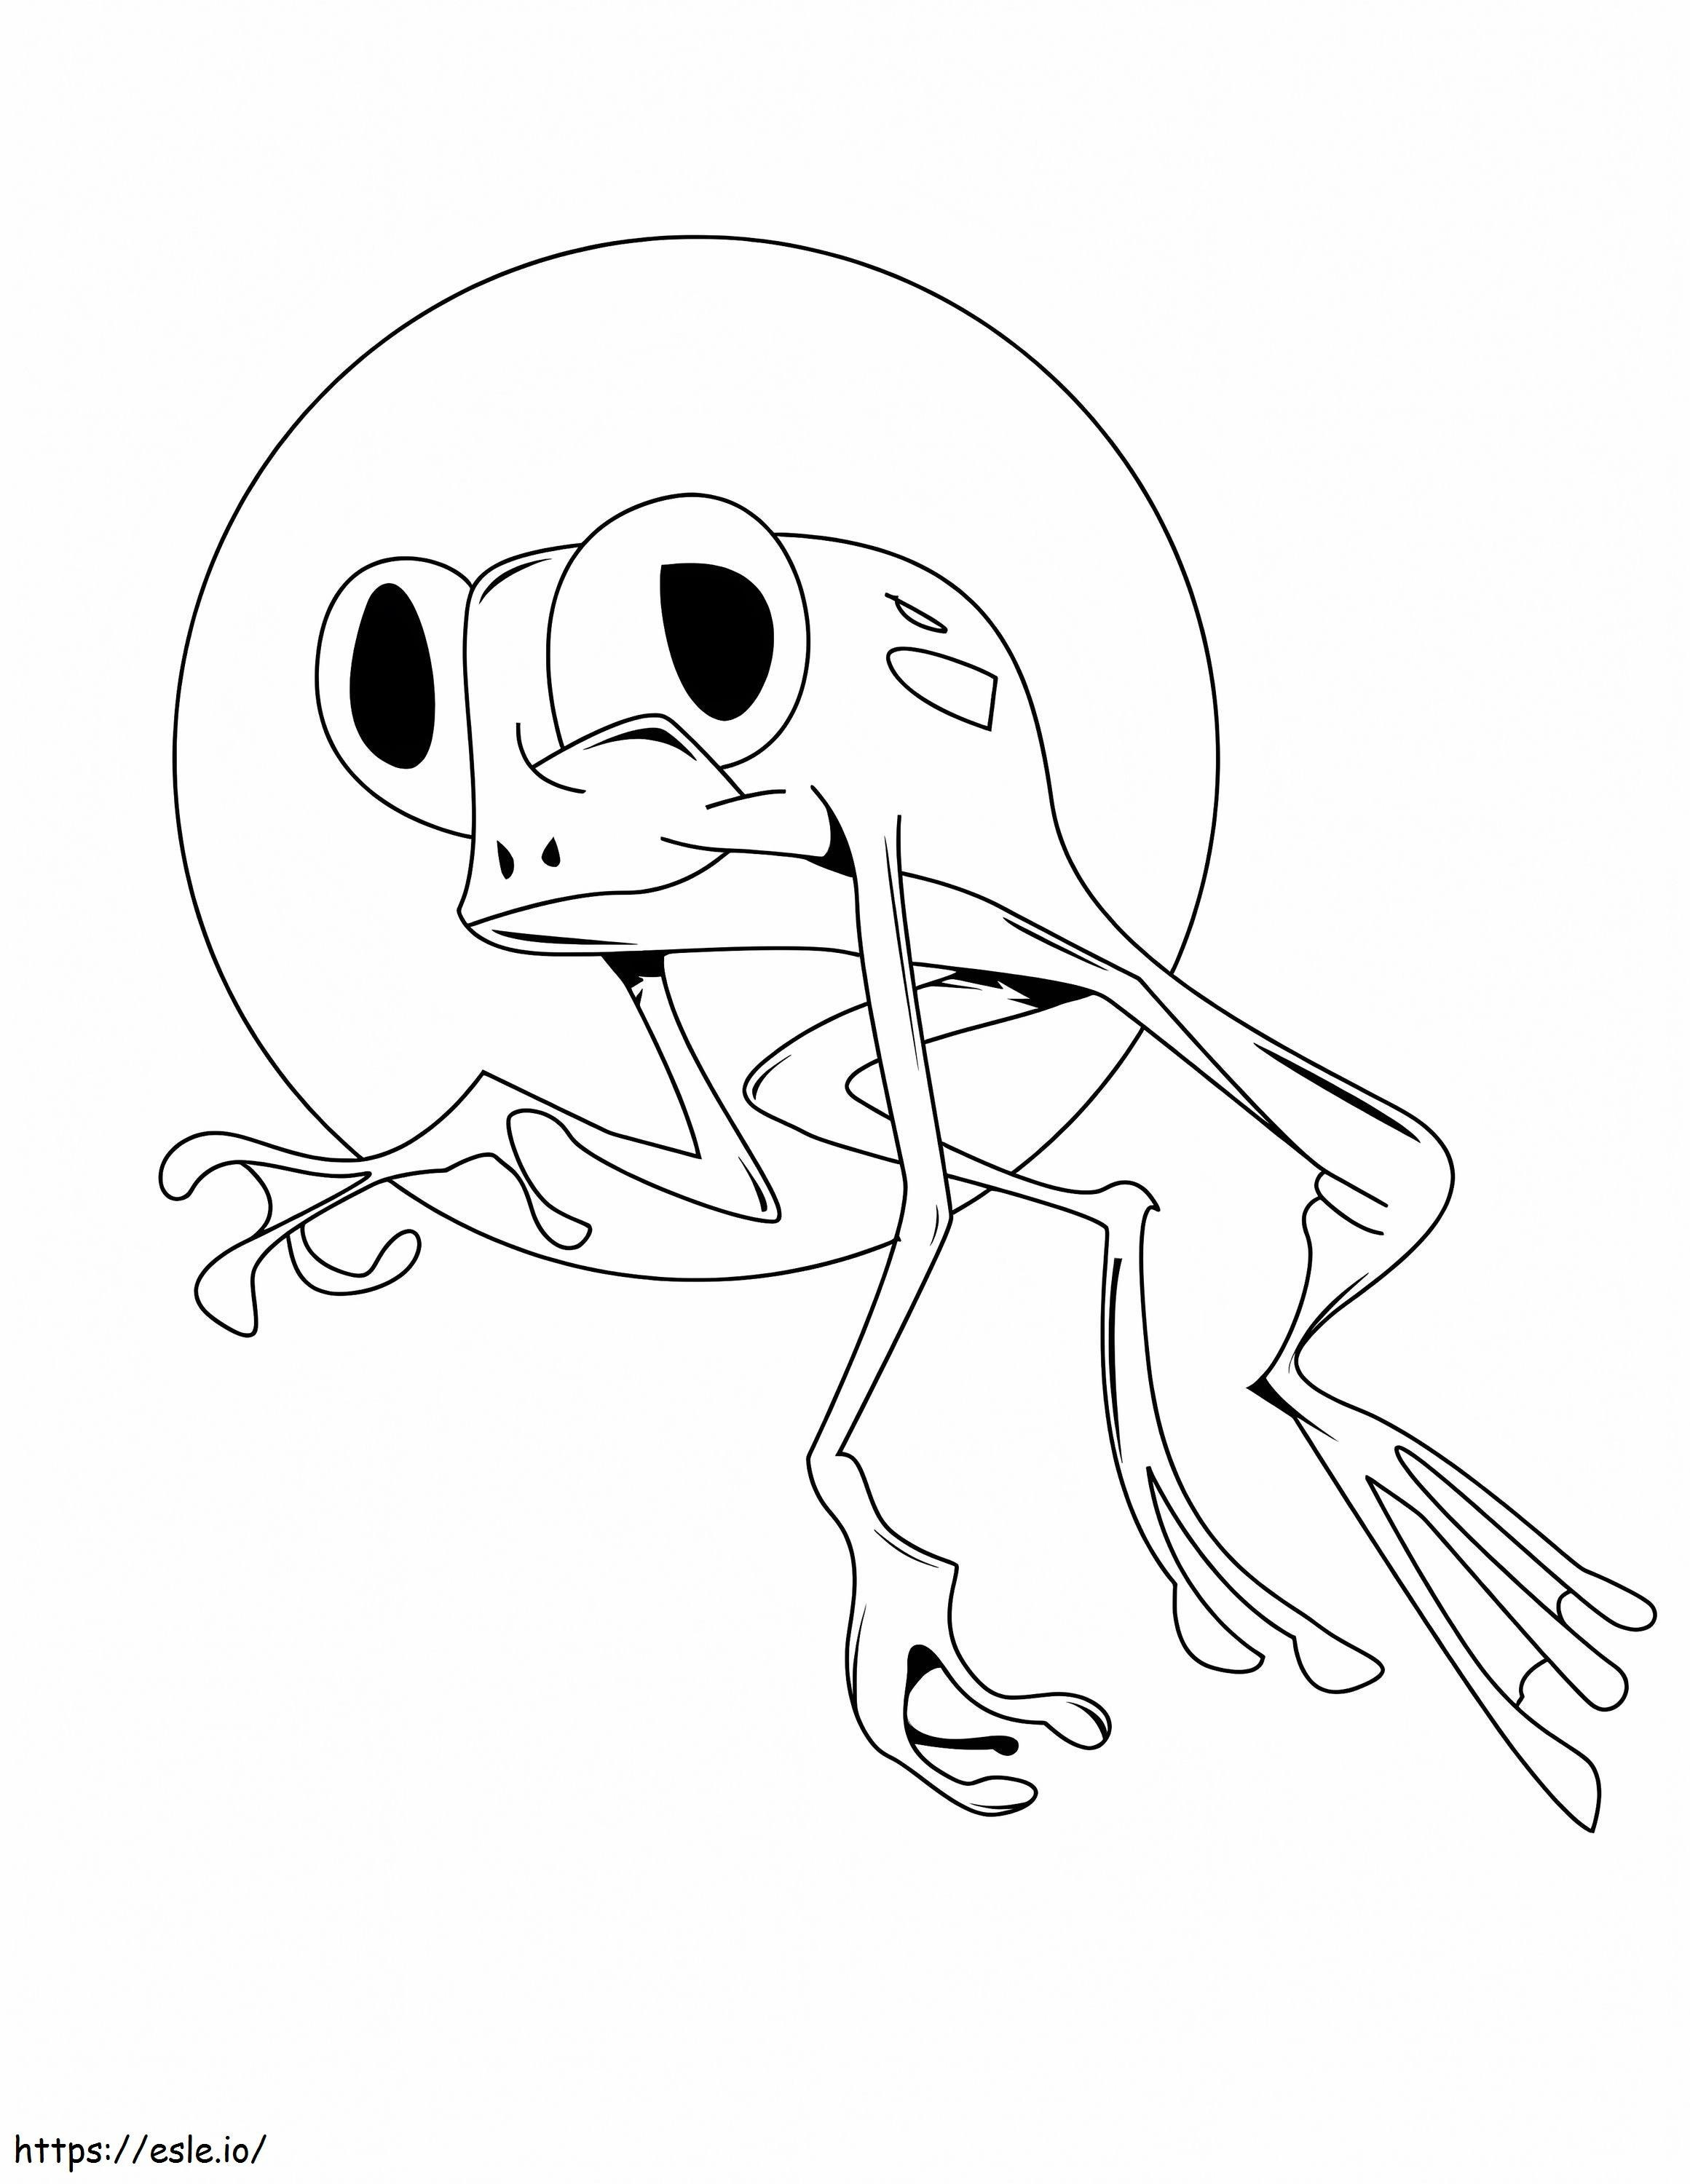 Frog Jump coloring page